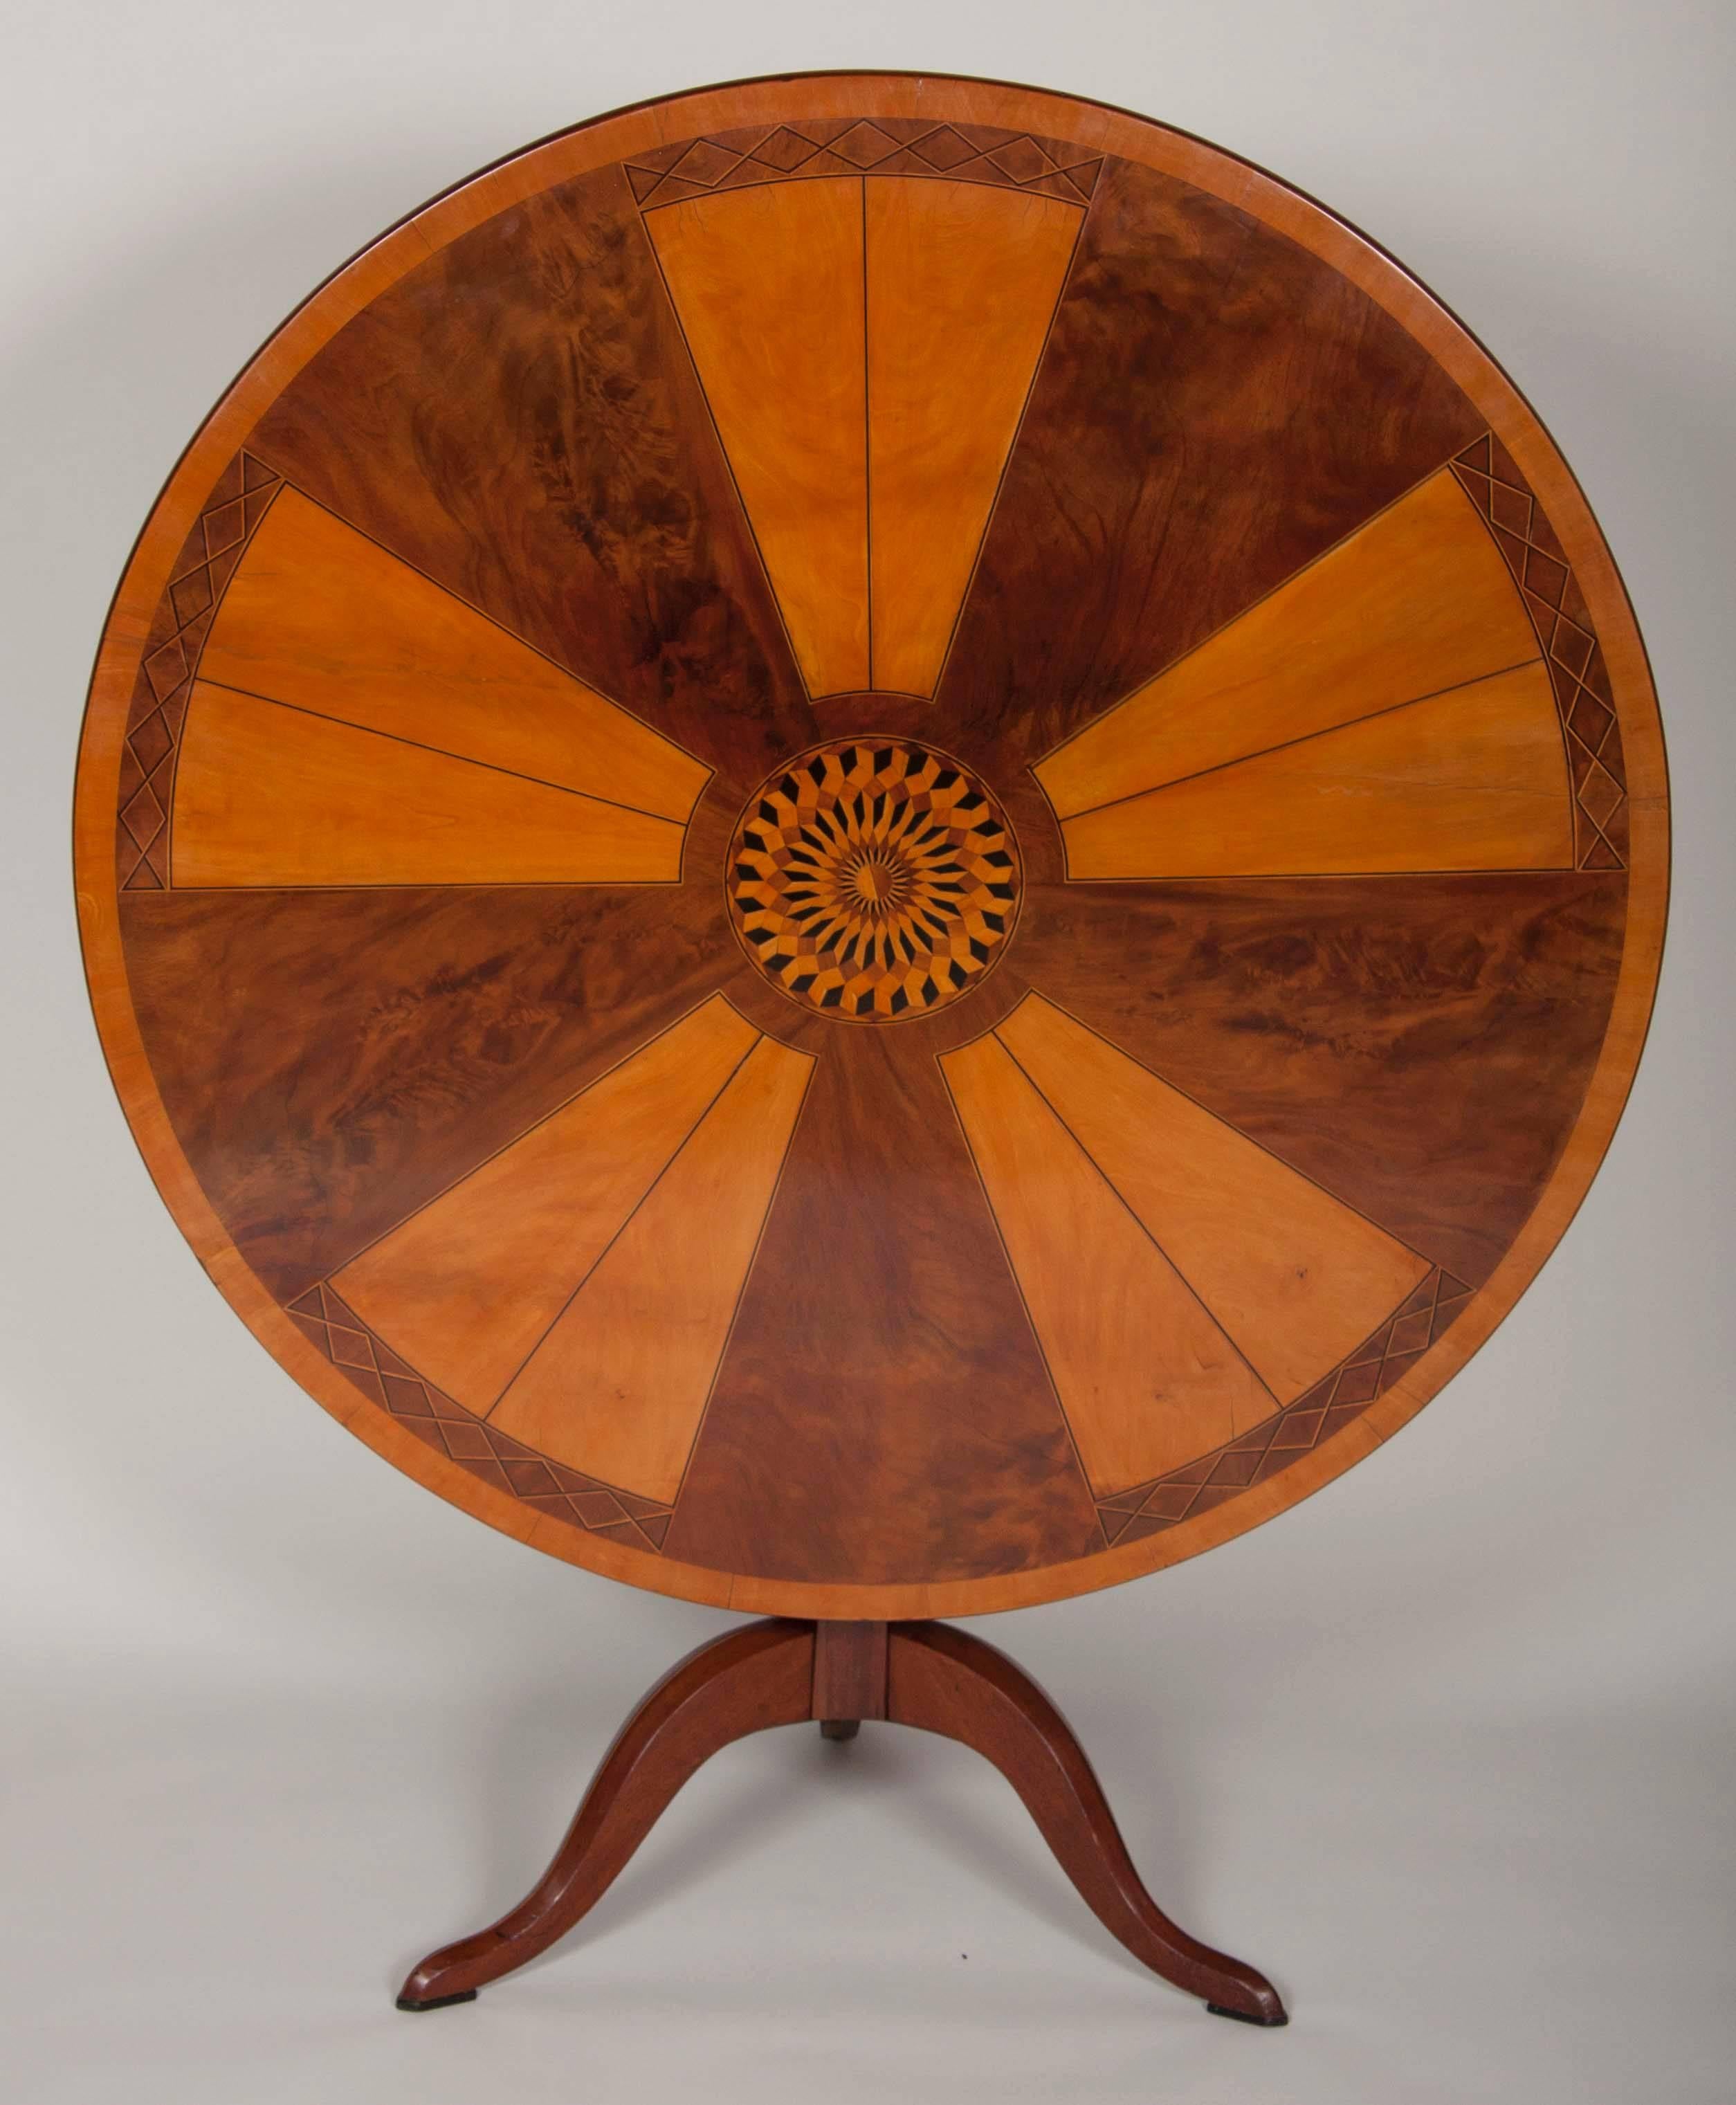 A beautiful Italian round tilt-top table with exceptional marquetry work. Marquetry woods include quilted mahogany, ebony and fruitwood.